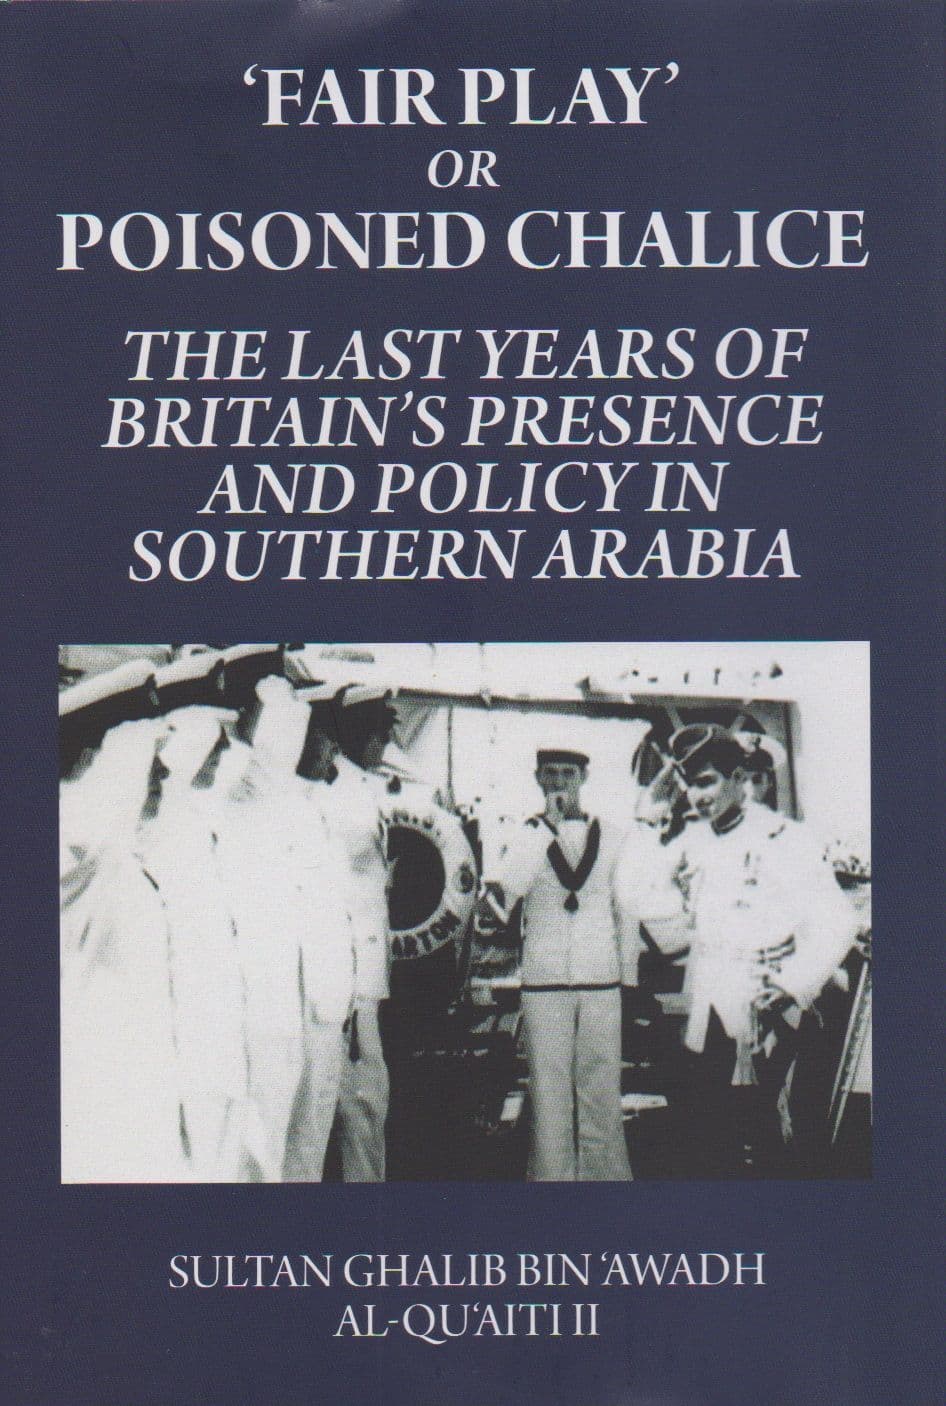 'Fair Play' or Poisoned Chalice: The Last Years of Britain's Presence and Policy in Southern Arabia